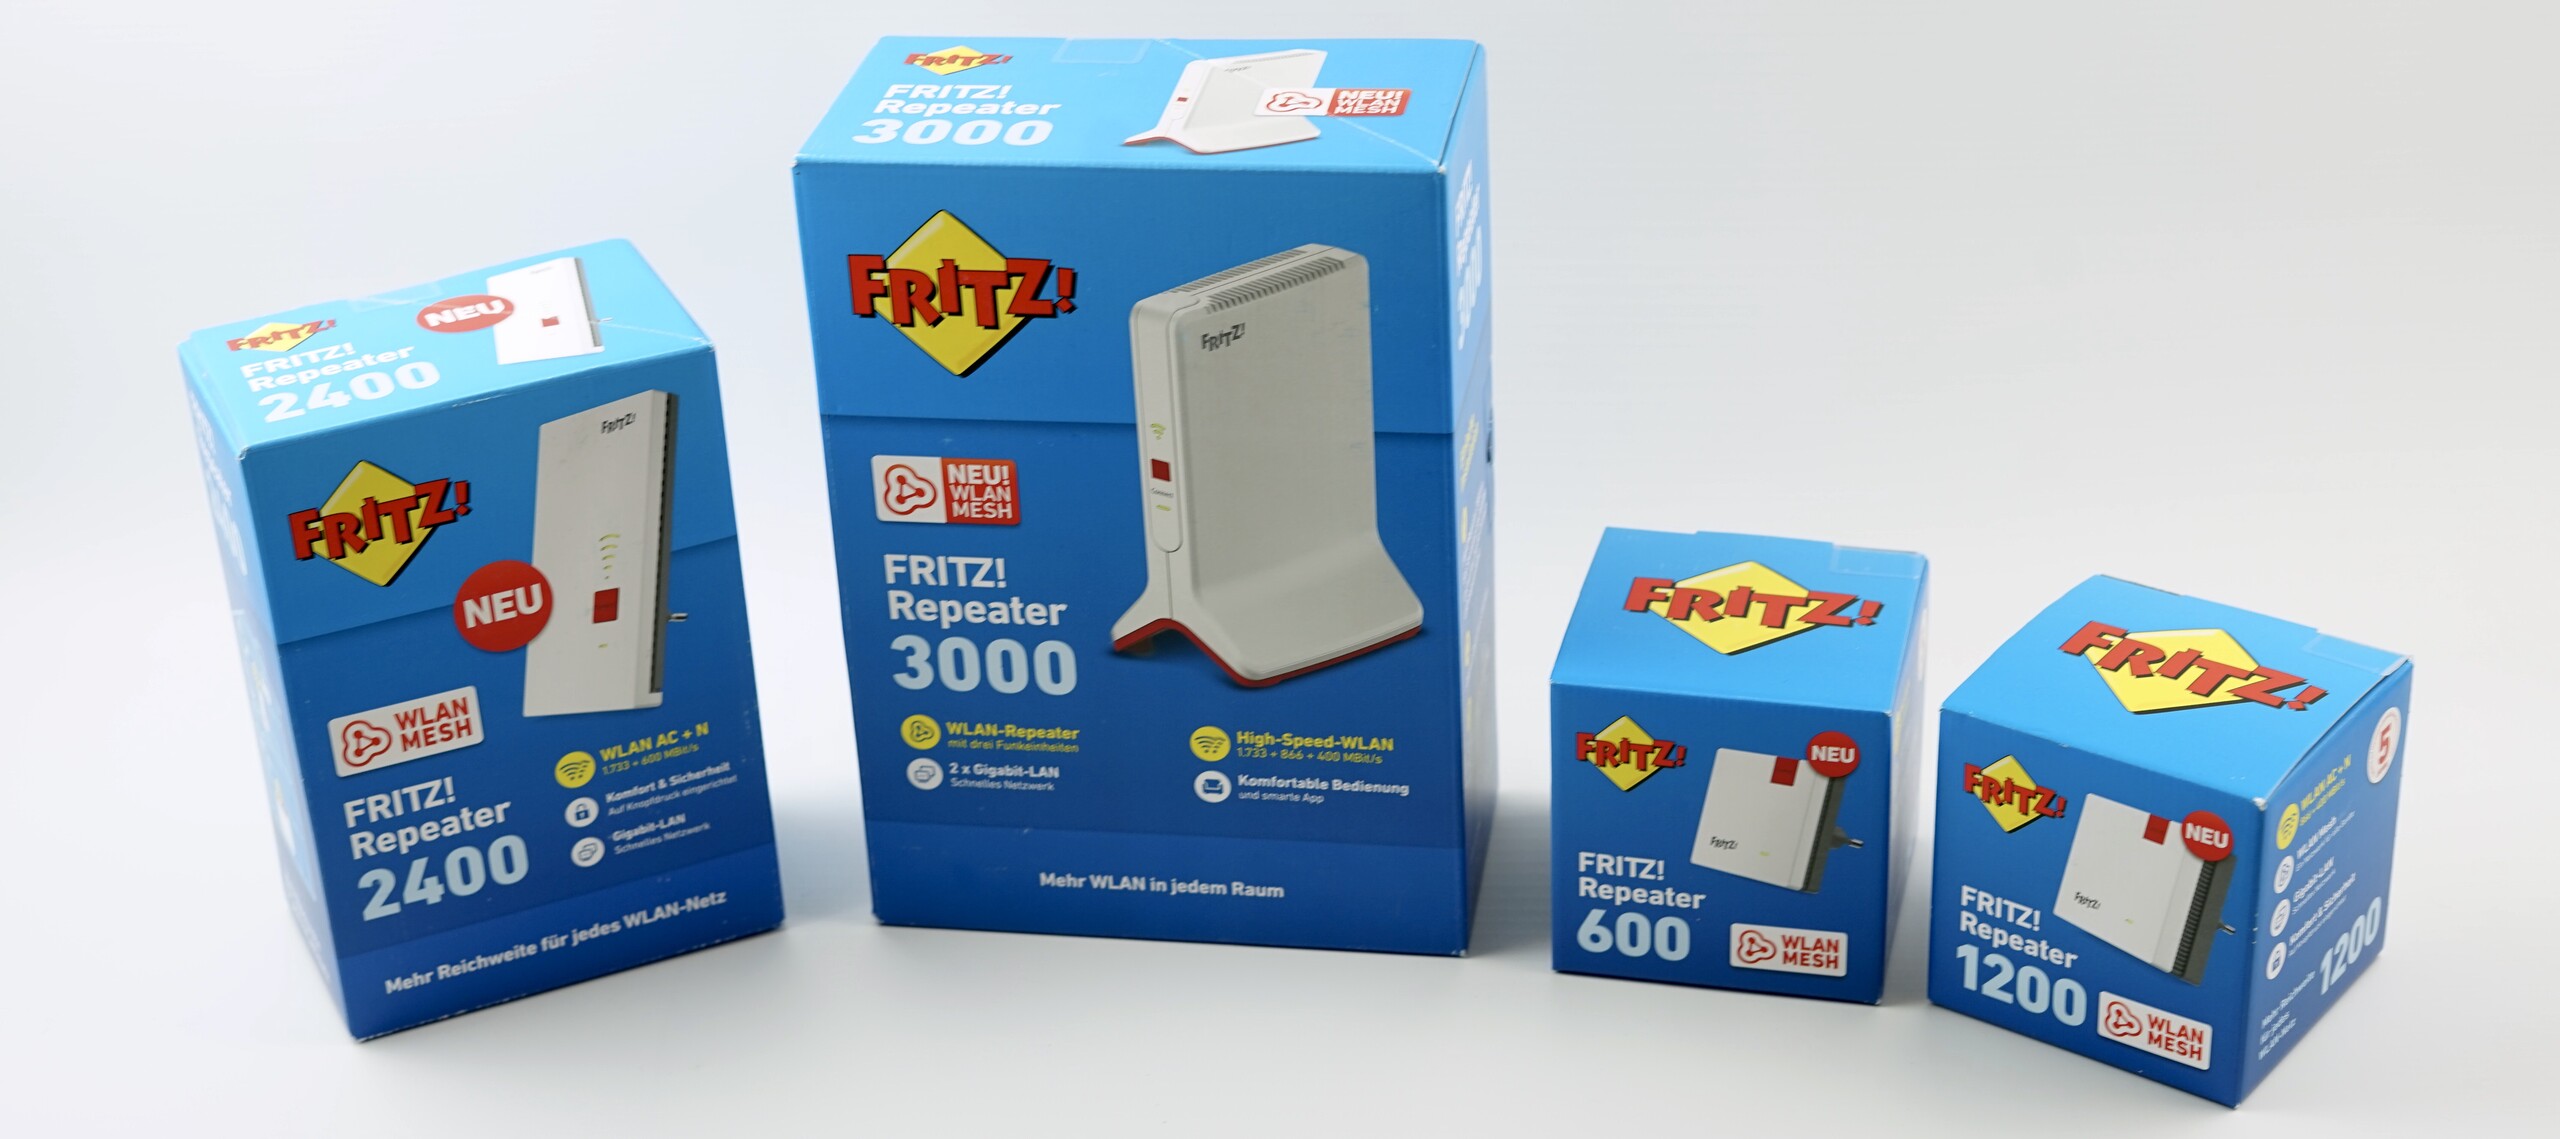 AVM Fritz! WLAN Repeater Reviews 1200, - NotebookCheck.net and Review 2000 1750E, 600, 3000